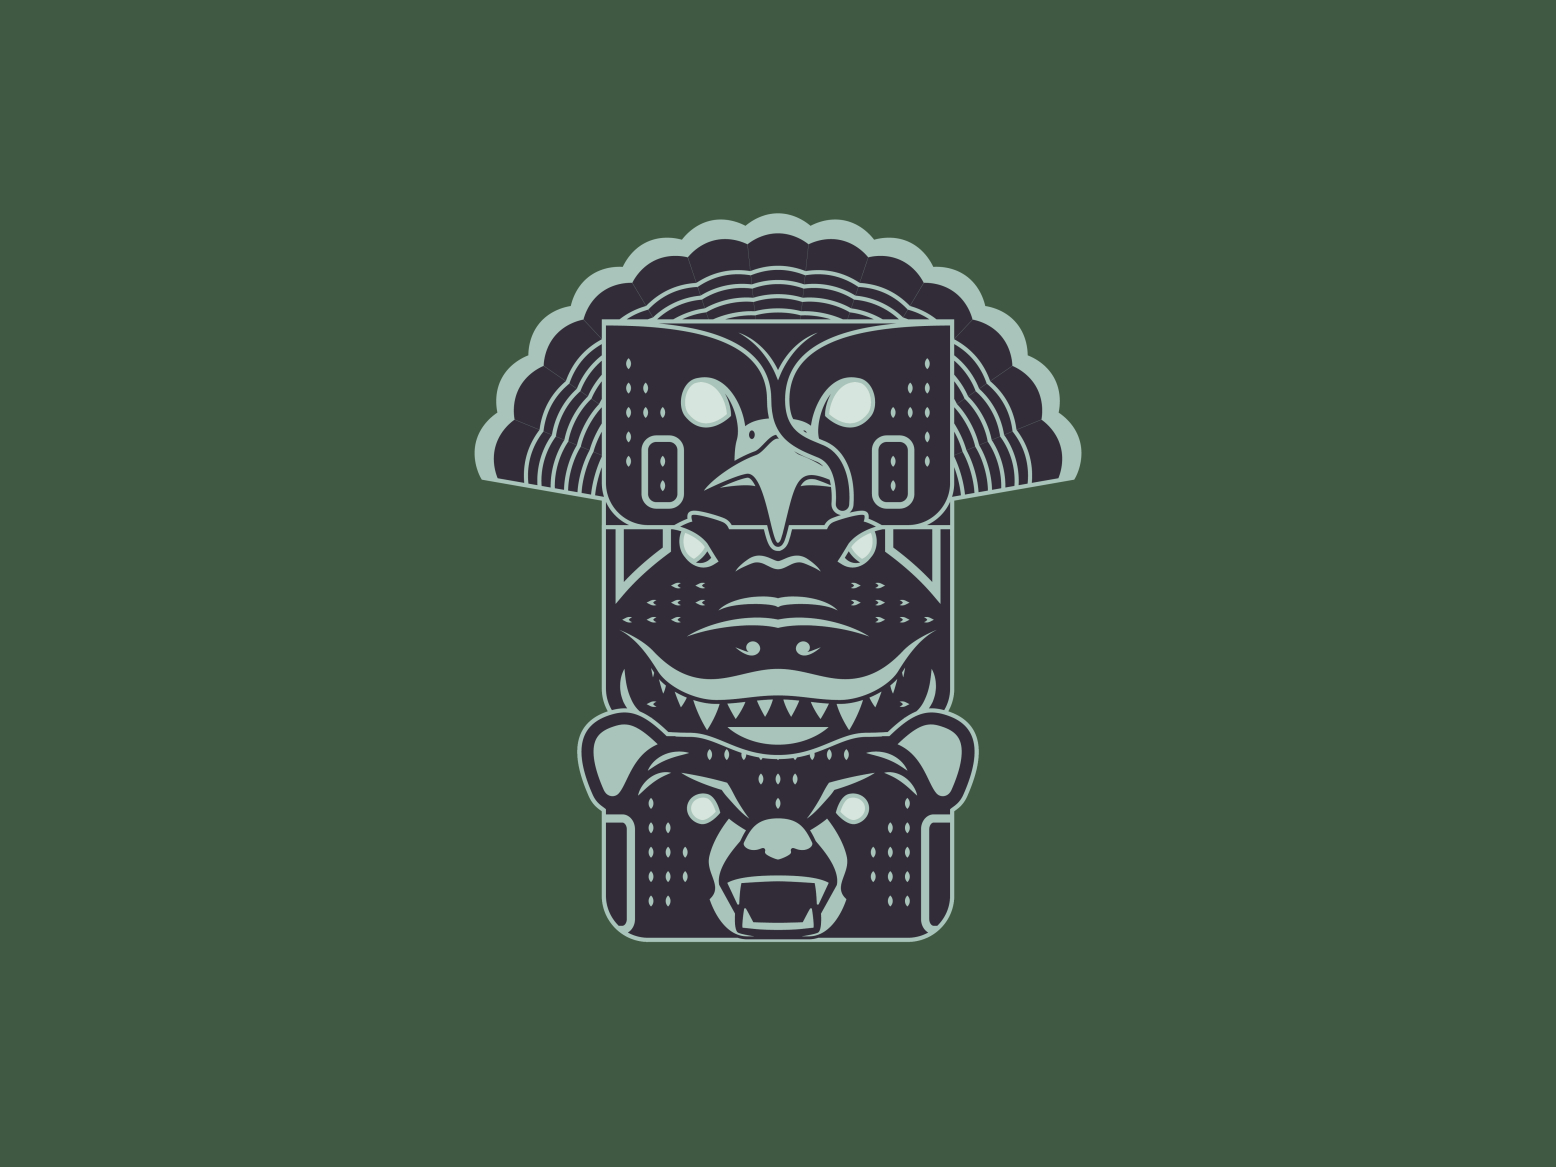 Hunger Totem Pole by Bryan Richard Keith on Dribbble